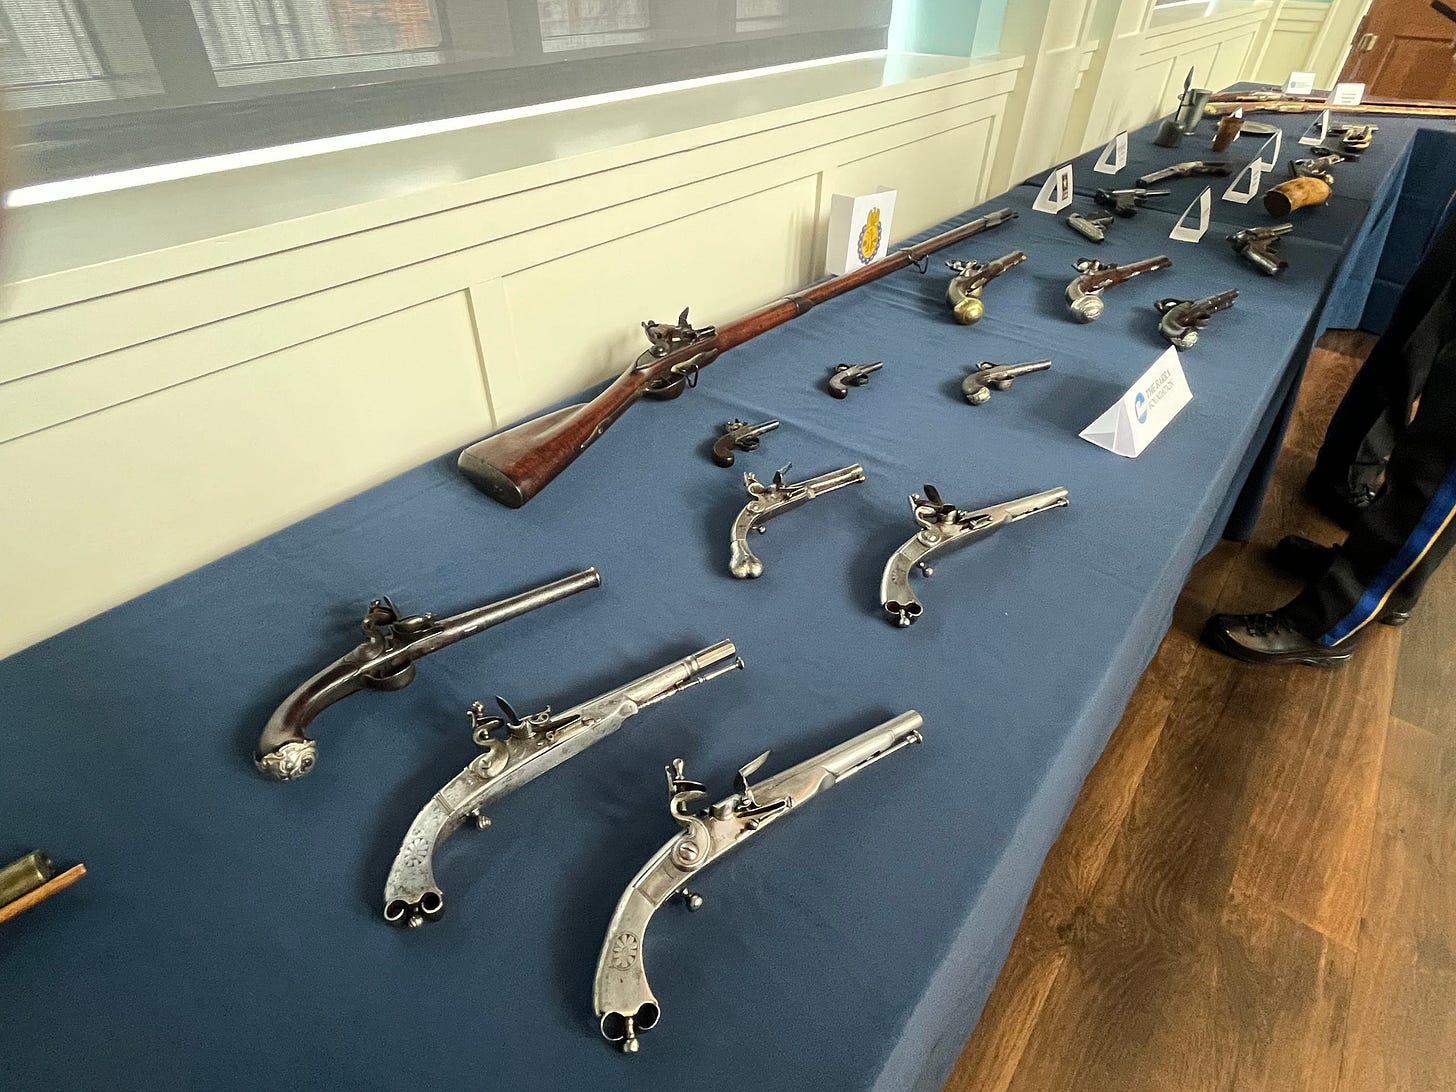 Some of the 50 firearms and other historical artifacts returned to representatives from 16 museums at a repatriation ceremony at the Museum of the American Revolution on March 13, 2023.